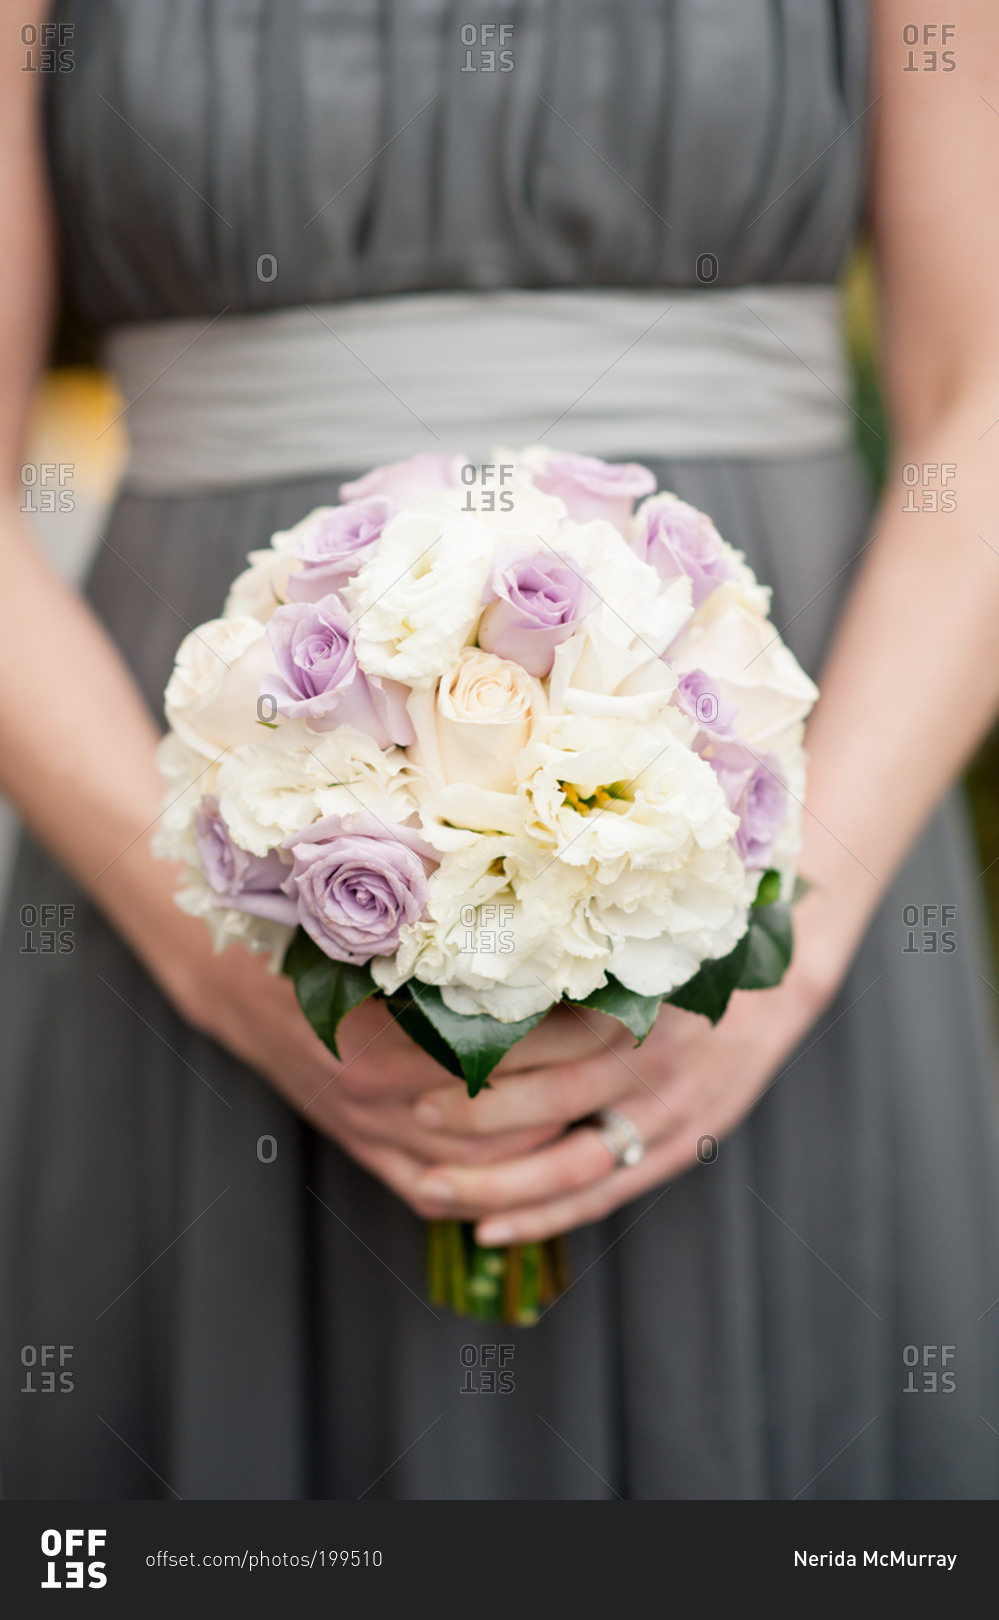 Bridesmaid in gray dress holding bouquet of pale purple and white flowers